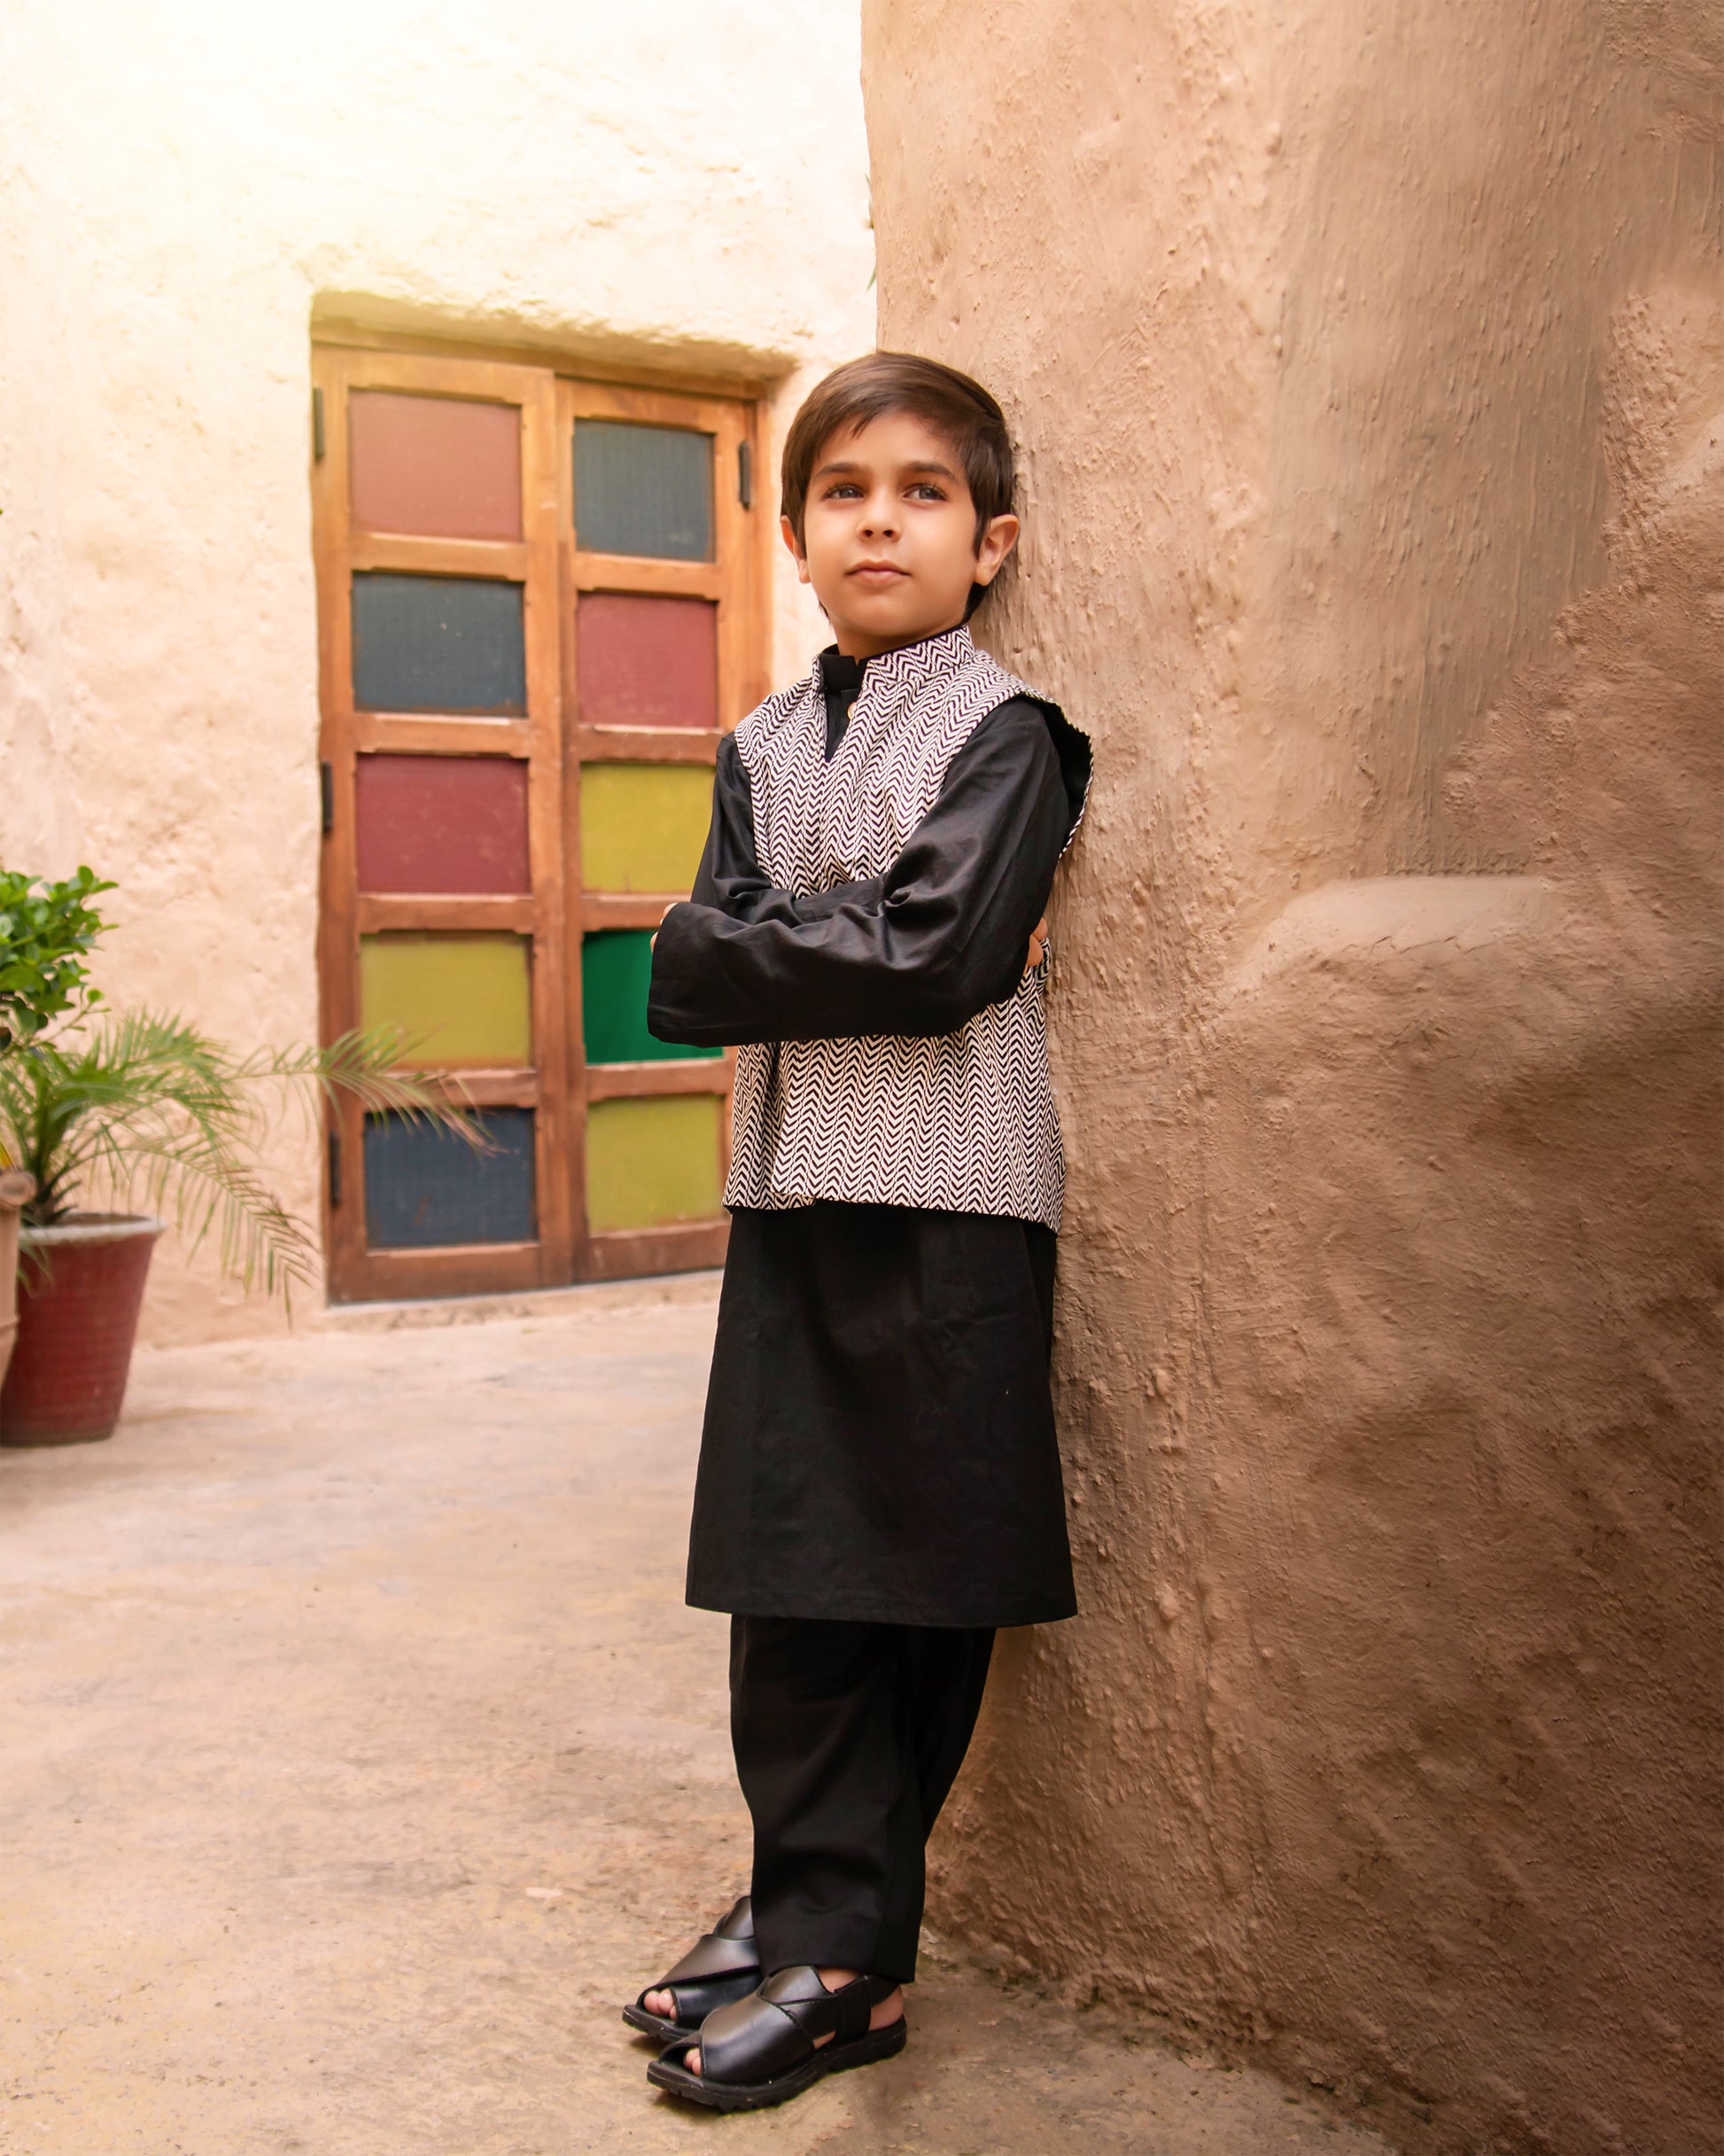 Charcoal, Designer Dress for Boys Boy cloths Price in Pakistan
Black color dress traditional festivals, weddings and outdoor gatherings in summer and winter seasons.
Fabric	Polyester, Cotton
Waistcoat	Monochromatic
Kurta	Black
Trouser	Black
Item	3pcs dress
